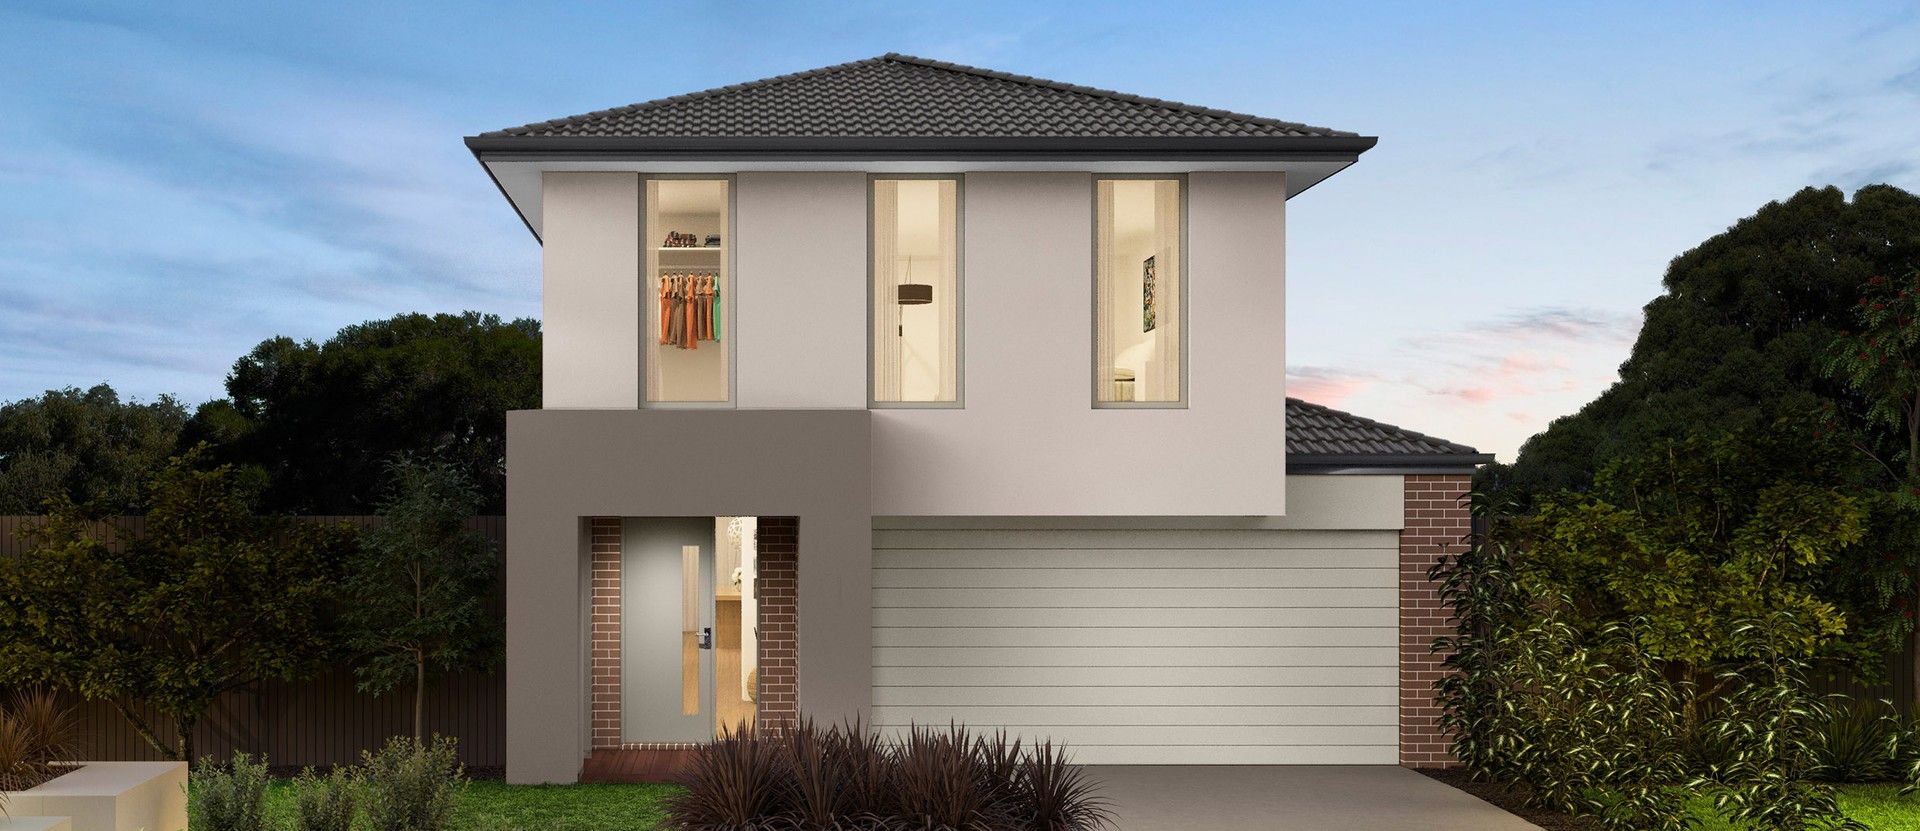 Ontario Street, Lot: 2552, Clyde VIC 3978, Image 0